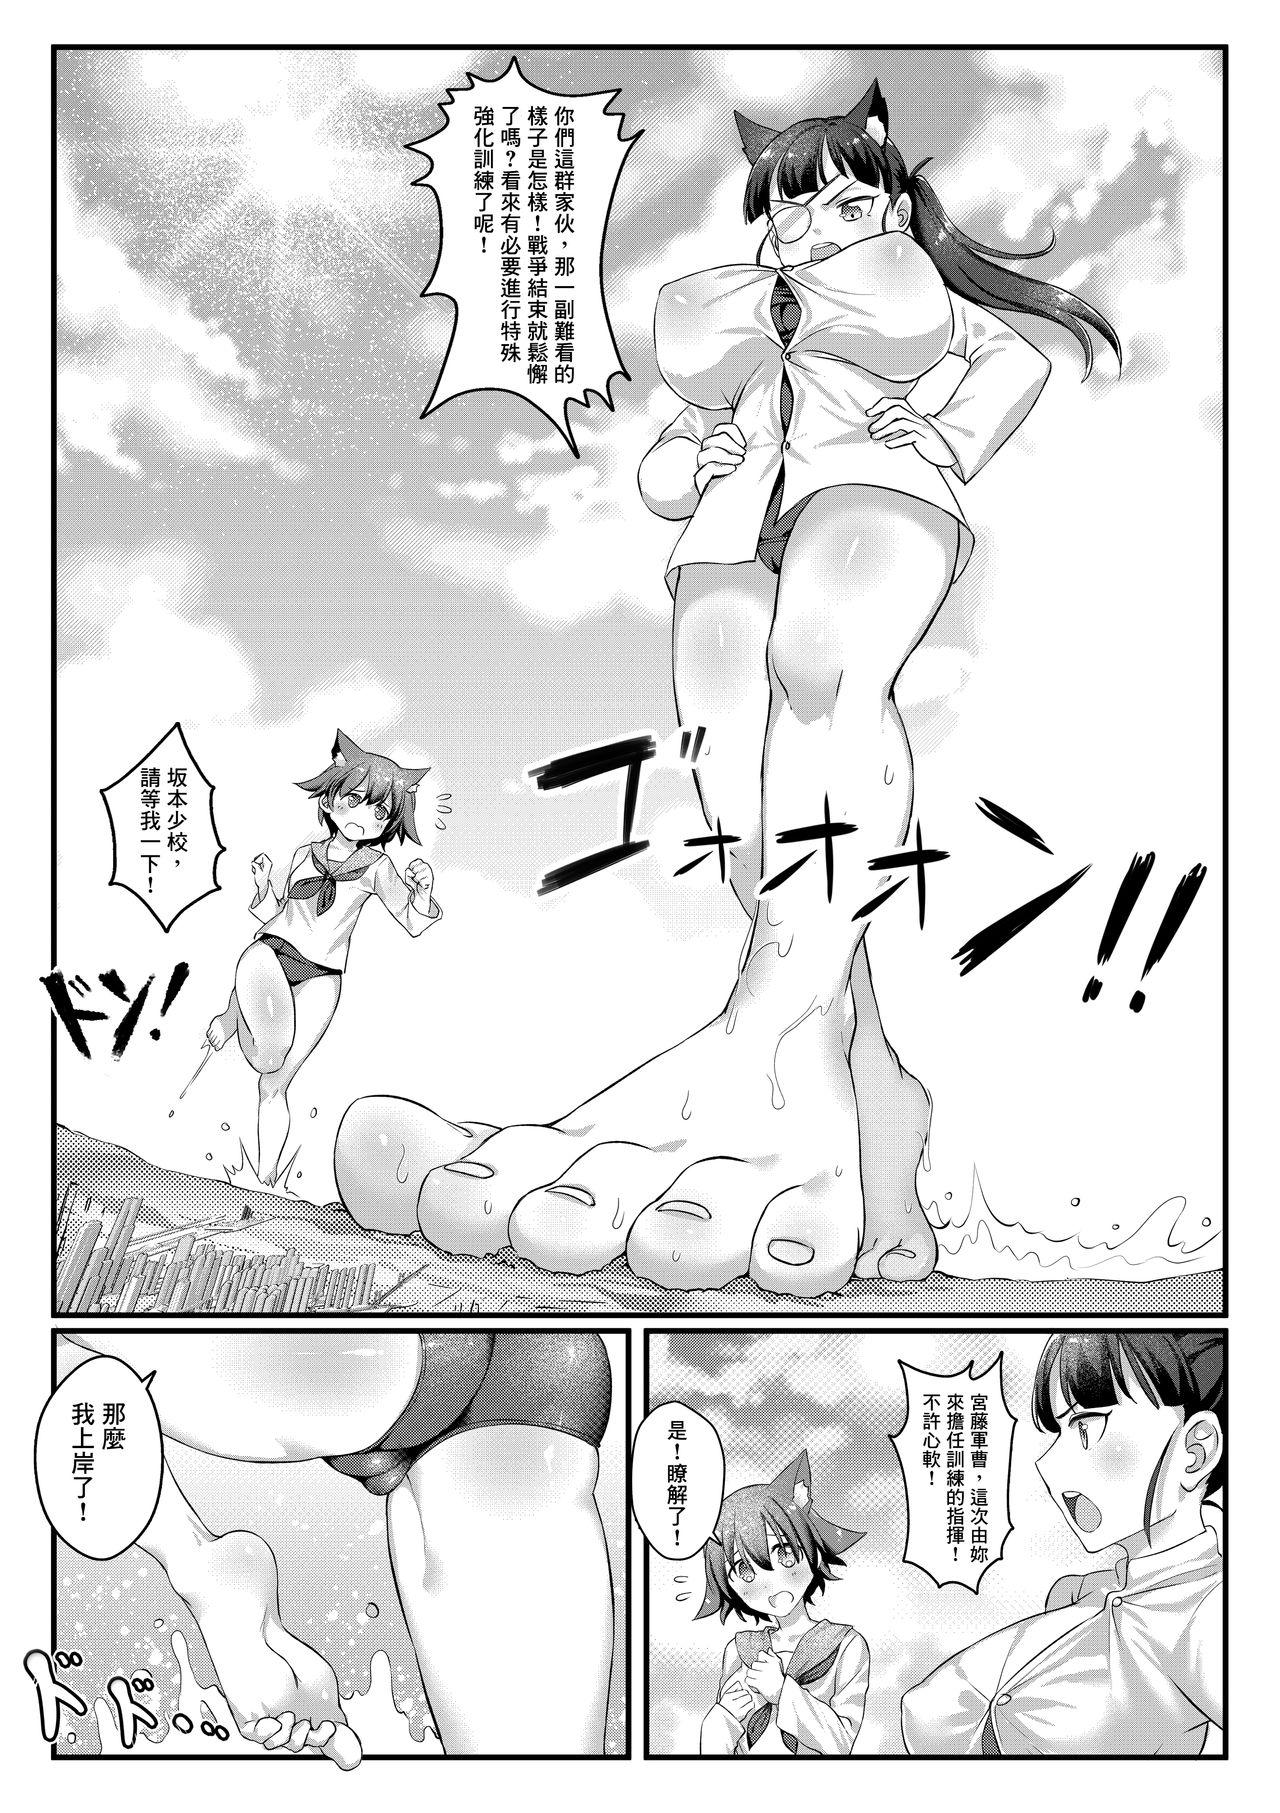 Student Air Strike!!! | 防空警報!!! - Strike witches Raw - Page 4